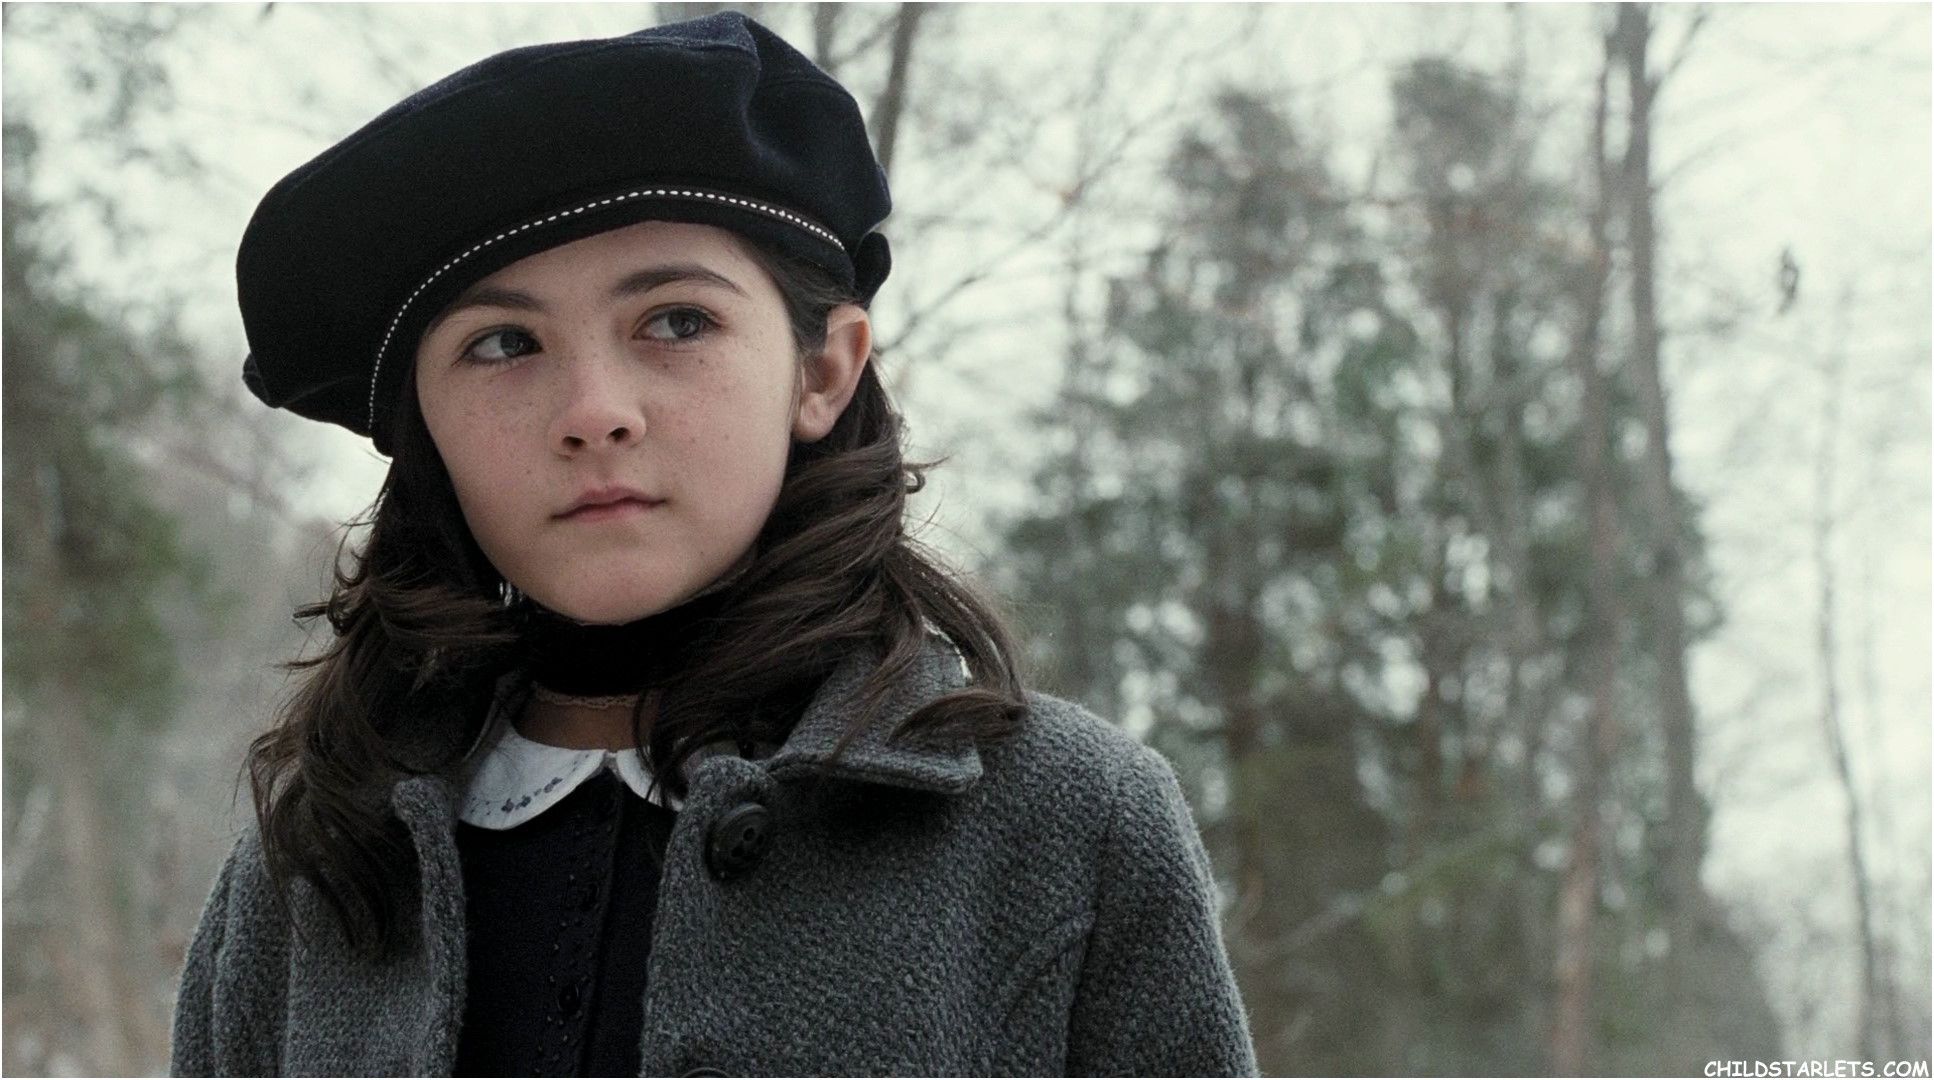 A psychological horror that showcases the brilliant acting talents of the then 12 year old, Isabelle Fuhrman. Description from. Orphan movie, Orphan, Orphan film